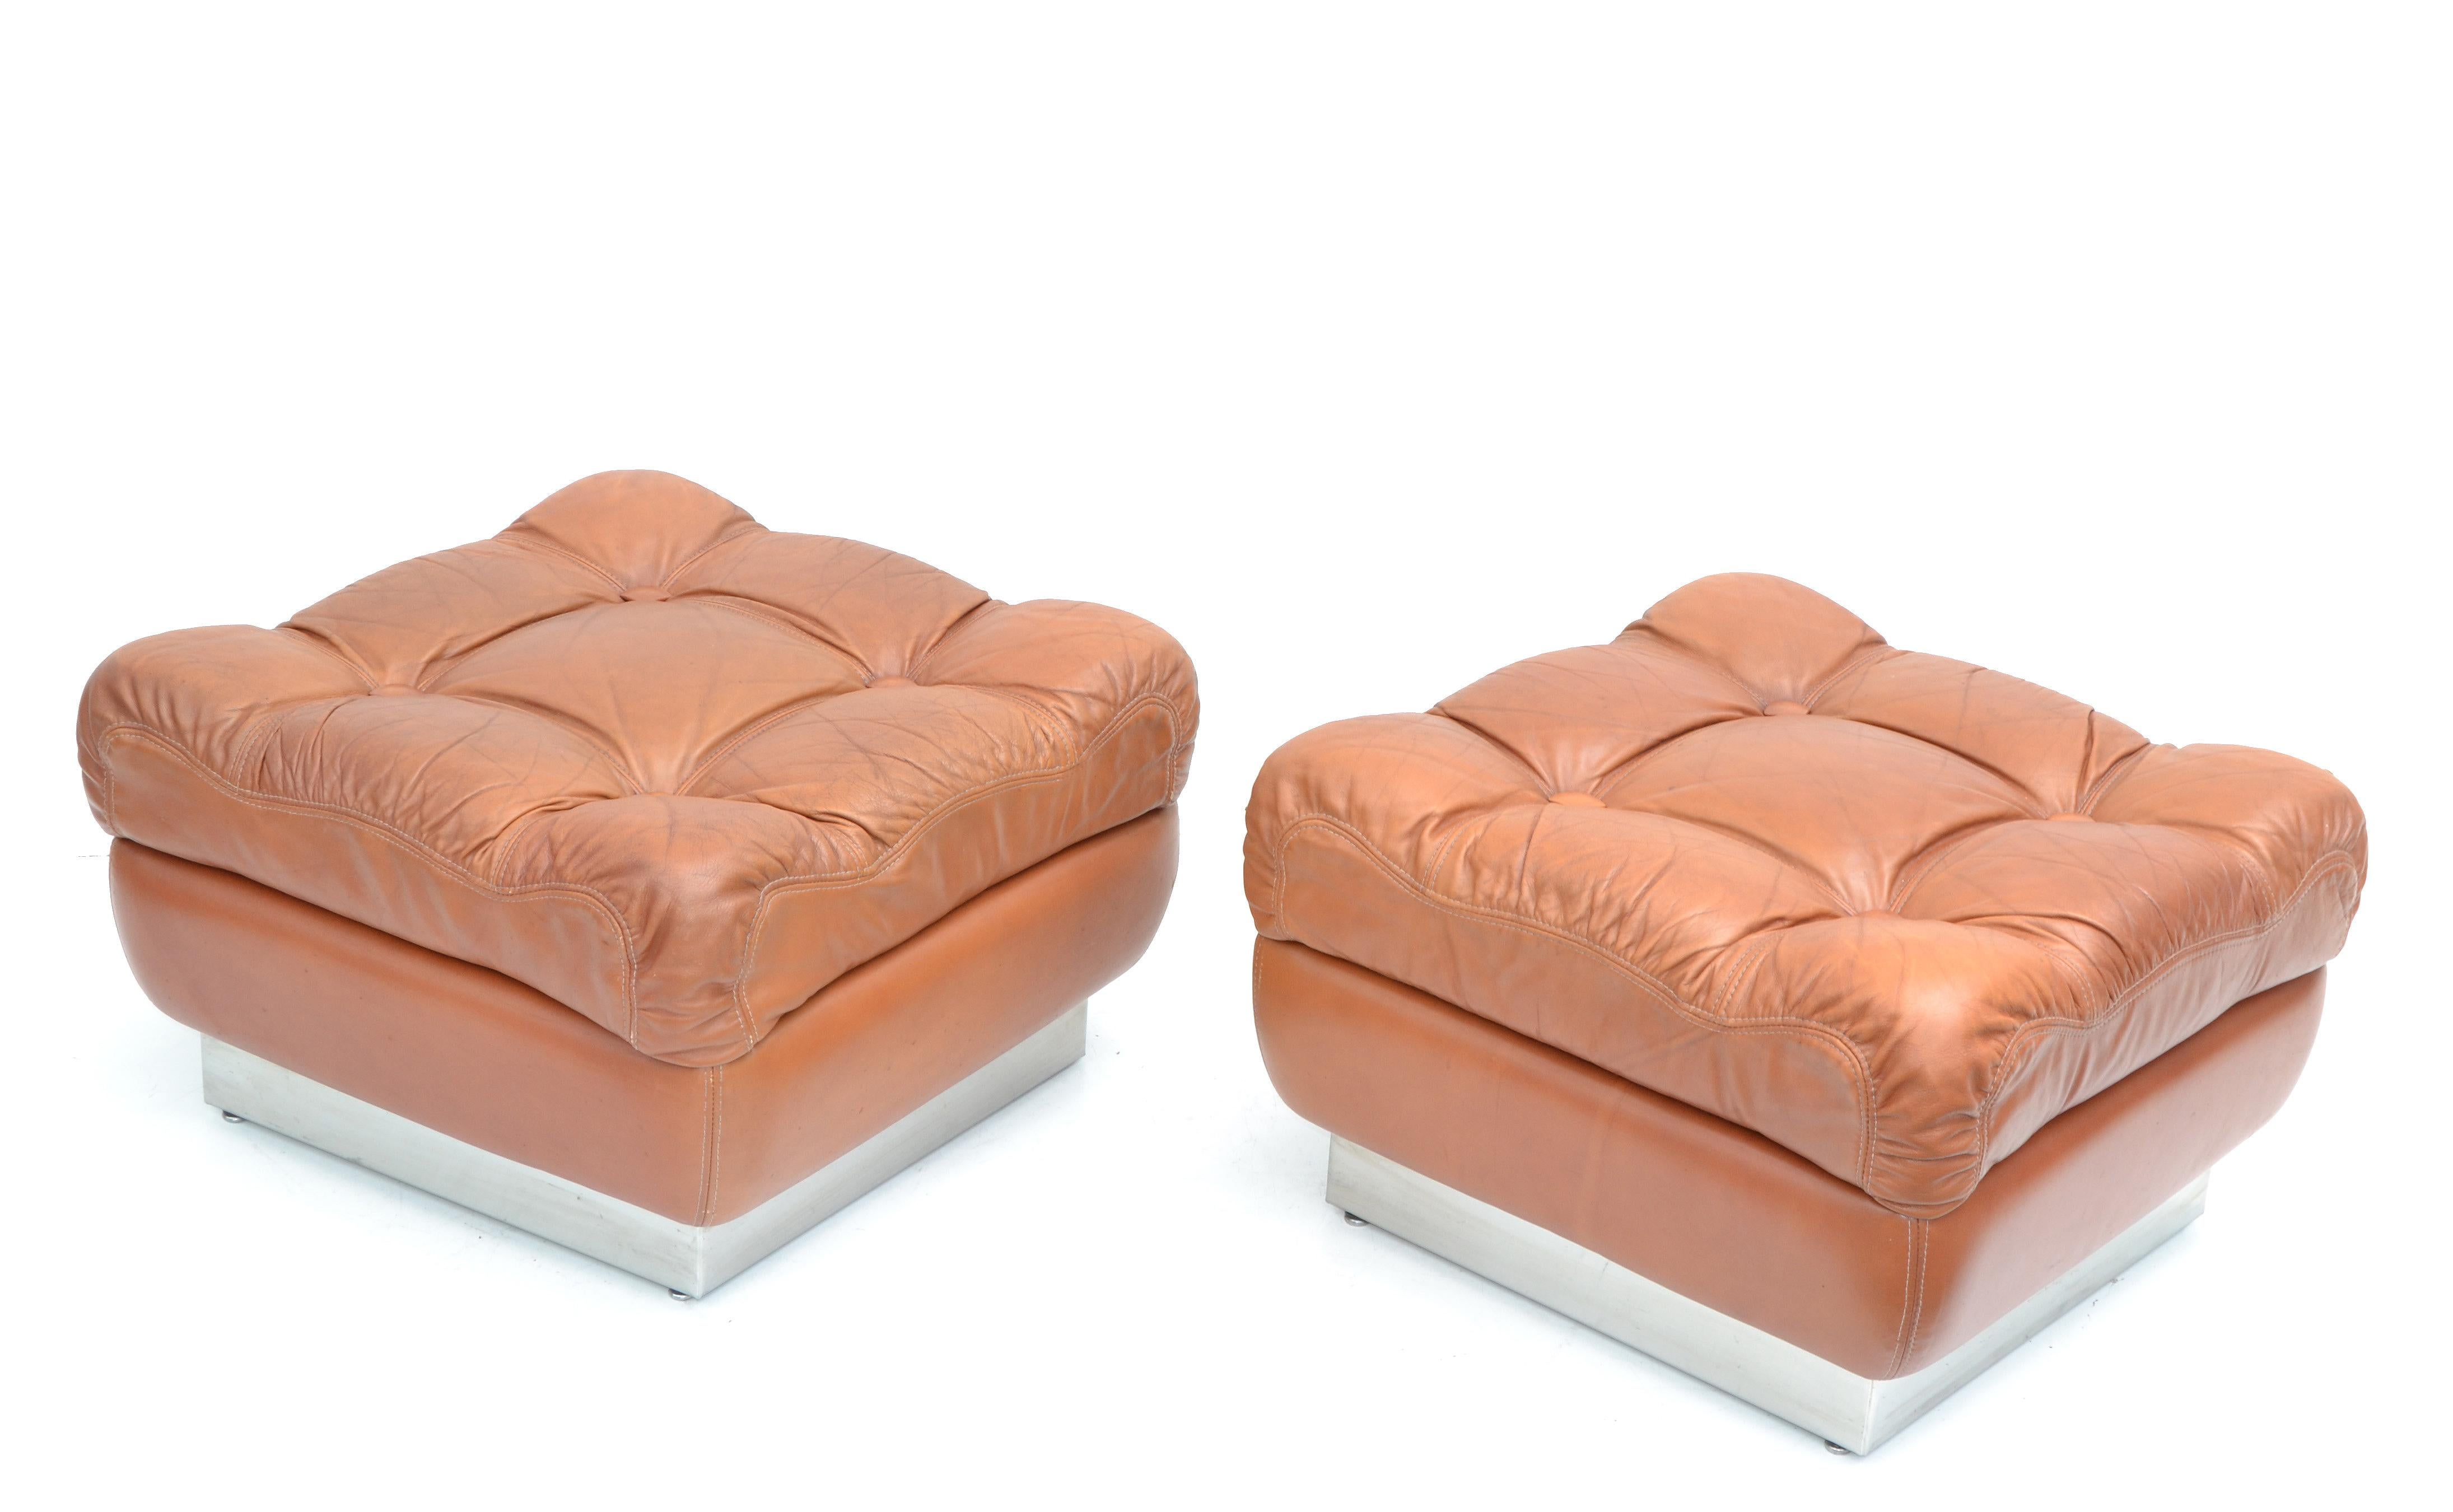 Pair of Jacques Charpentière Mid-Century Modern 1970 French stool, ottoman side tables in original tufted brown leather upholstery and polished chrome base.
Very good original condition.